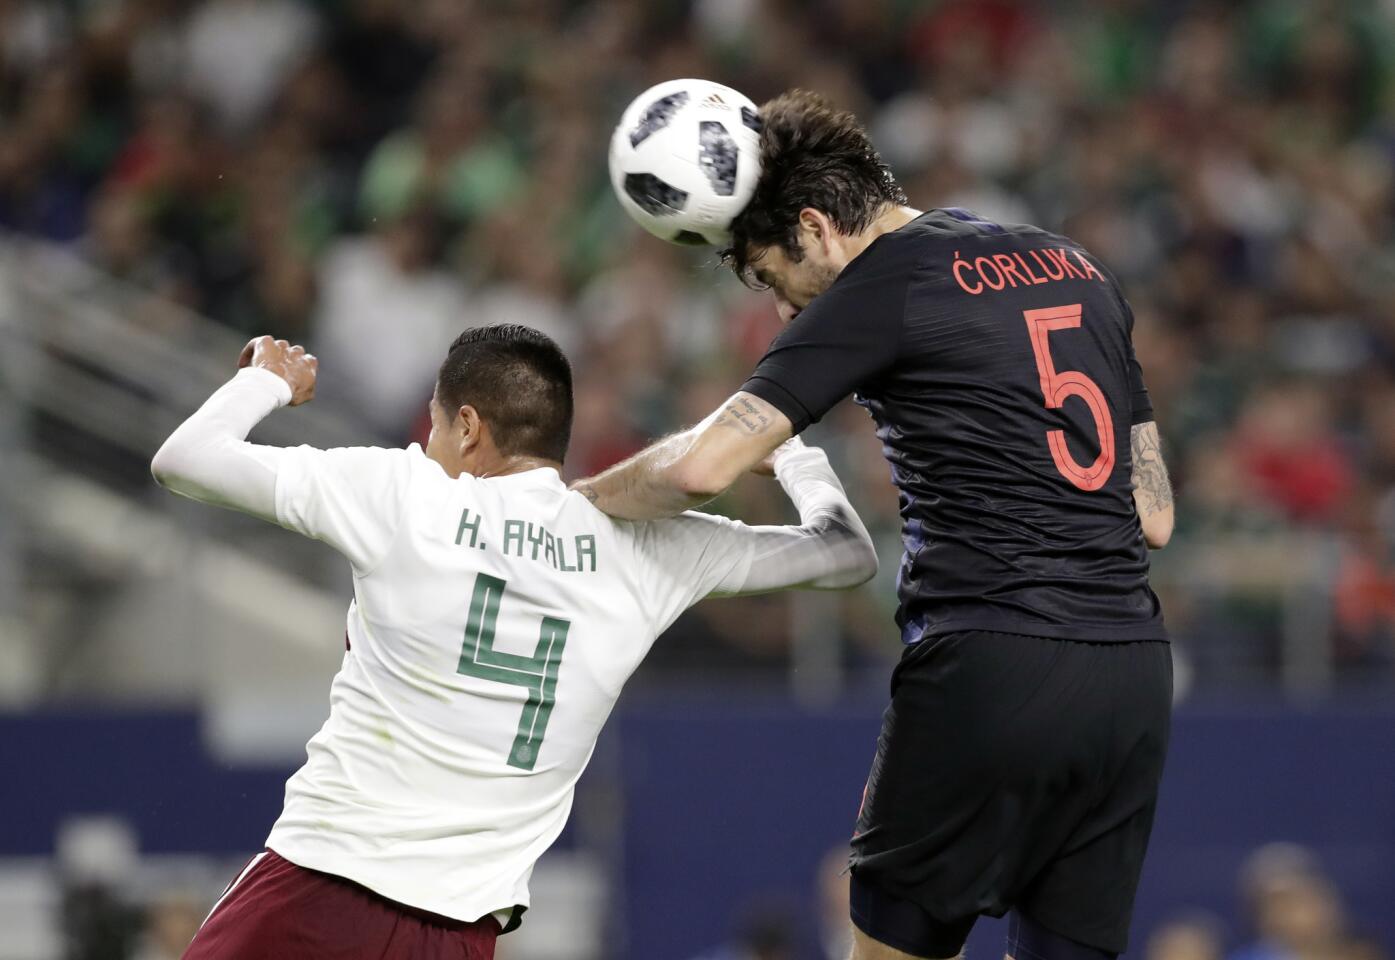 Mexico defender Hugo Ayala (4) defends as Croatia defender Vedran Corluka (5) heads to ball at the net off a corner kick in the first half of a friendly soccer match in Arlington, Texas, Tuesday, March 25, 2018. The shot by Corluka did not score. (AP Photo/Tony Gutierrez)